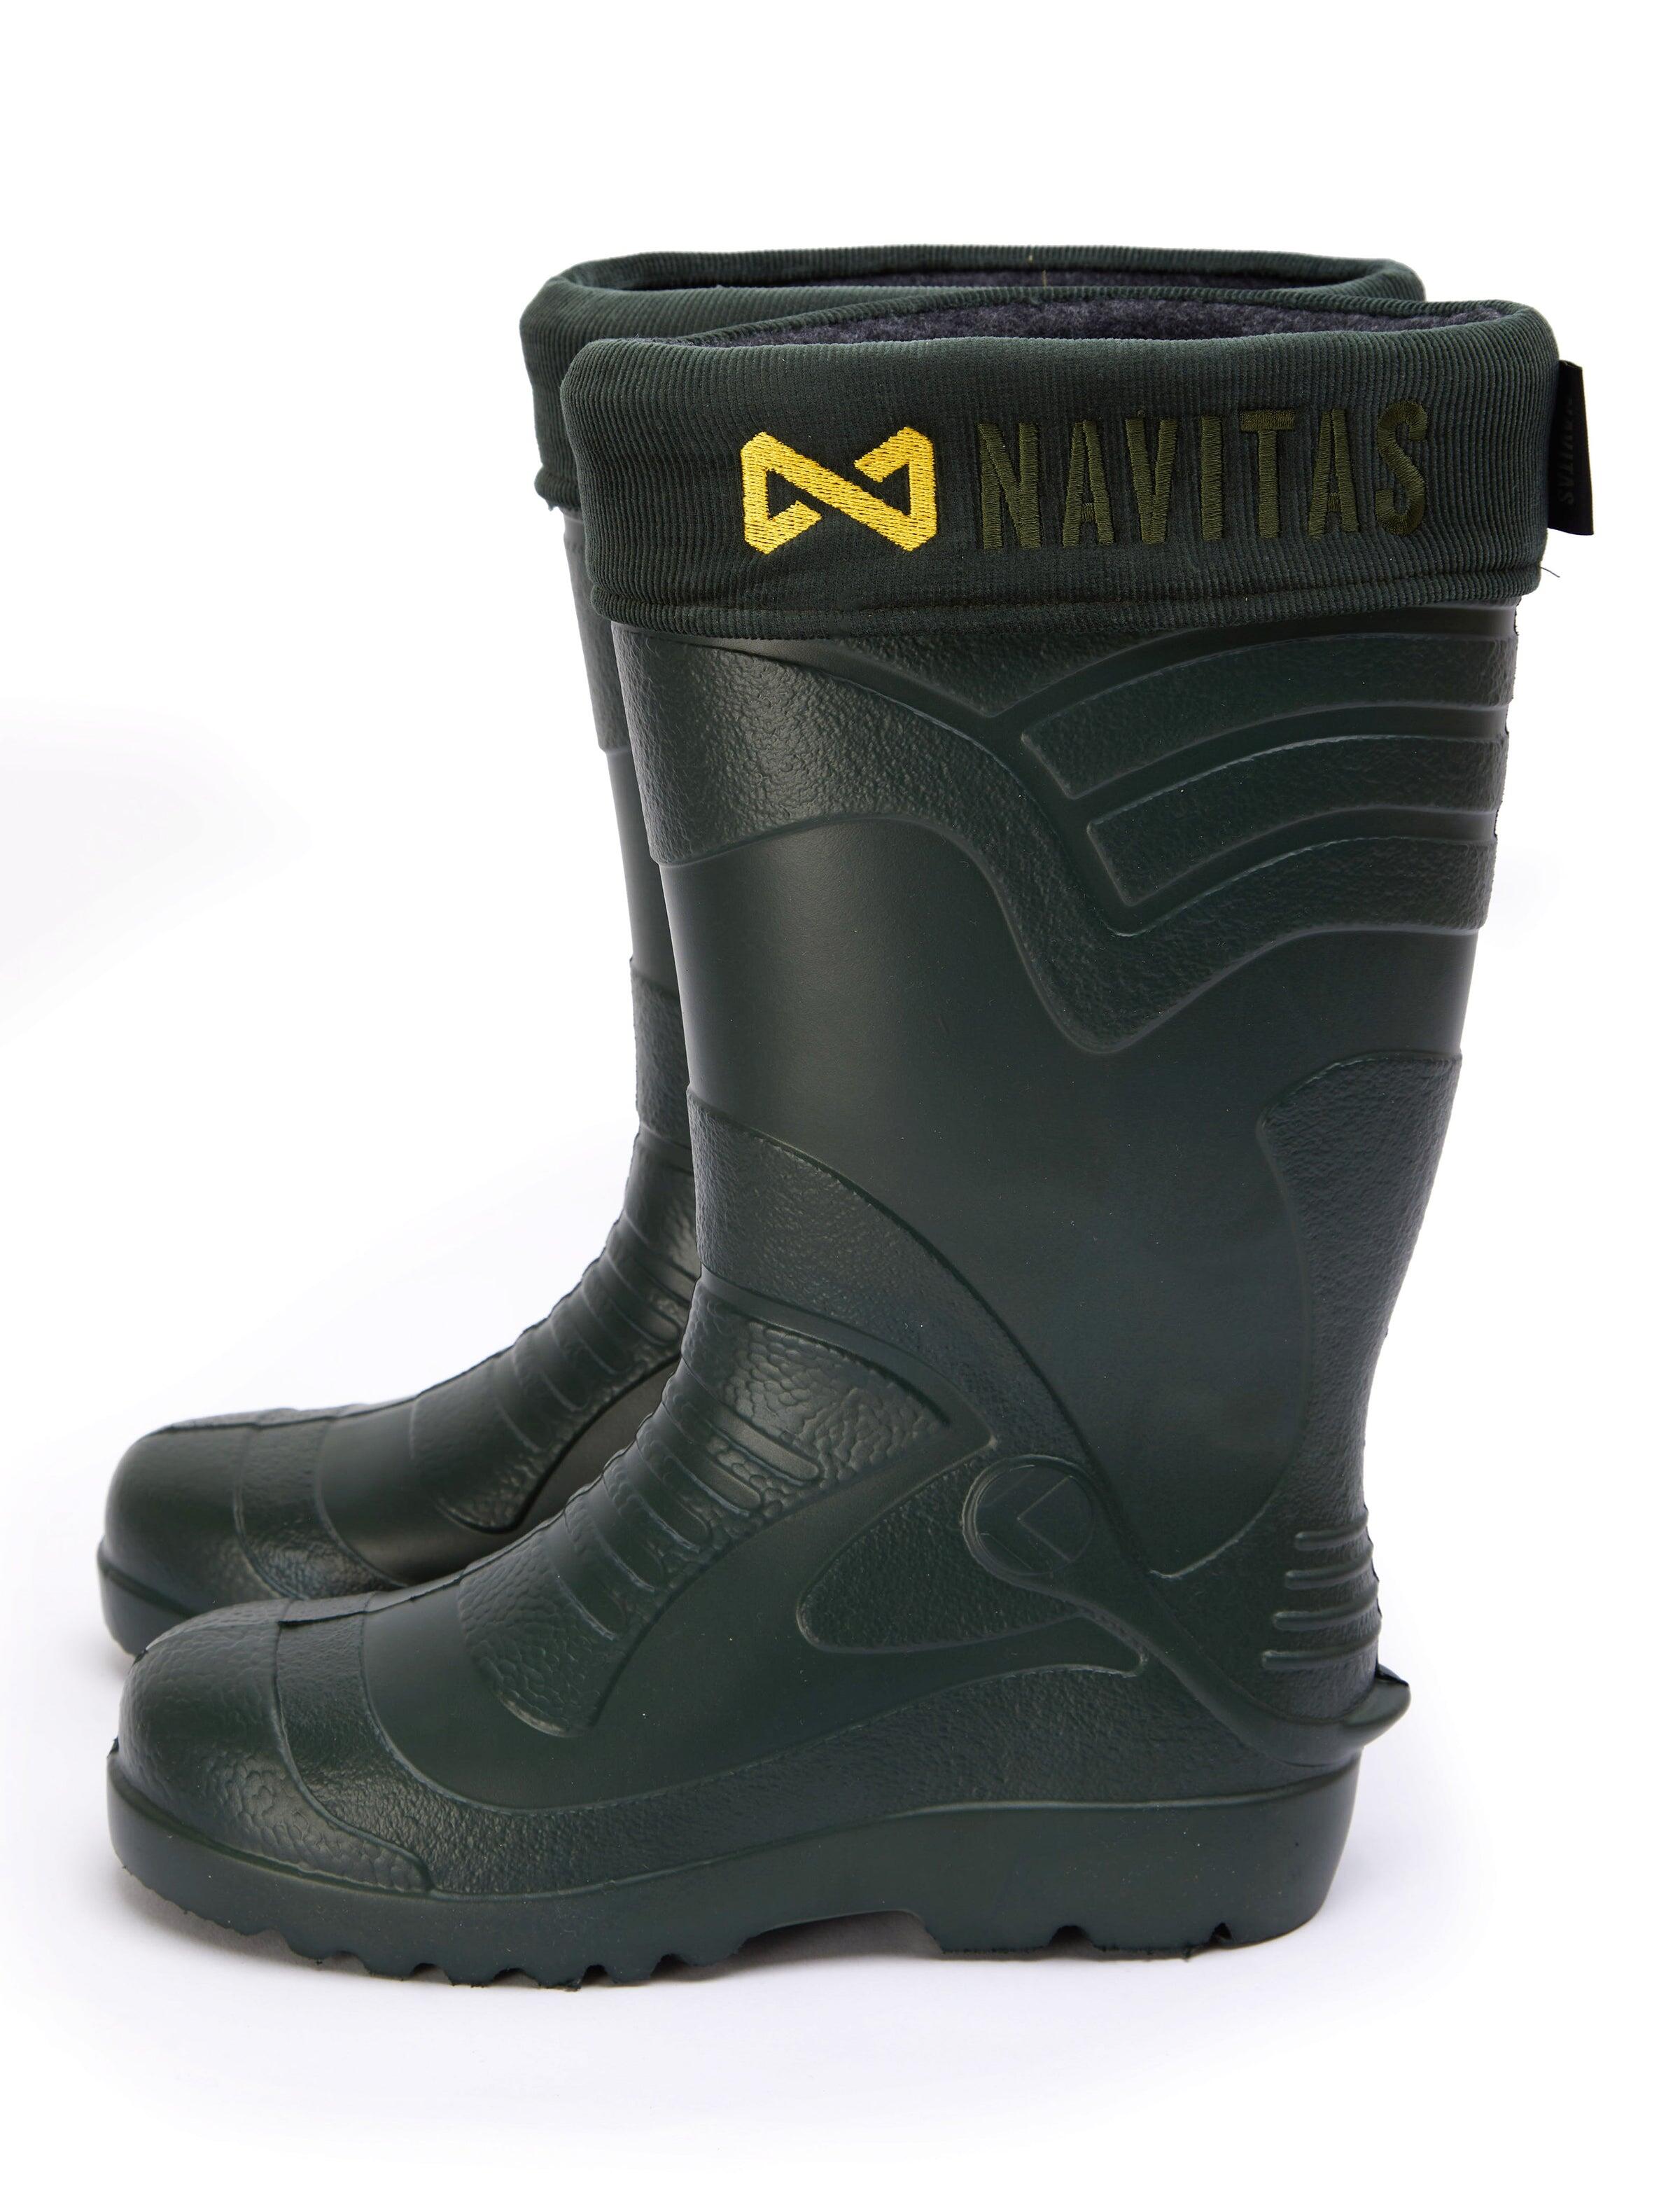 NVTS LITE Insulated Welly Boots 2/4